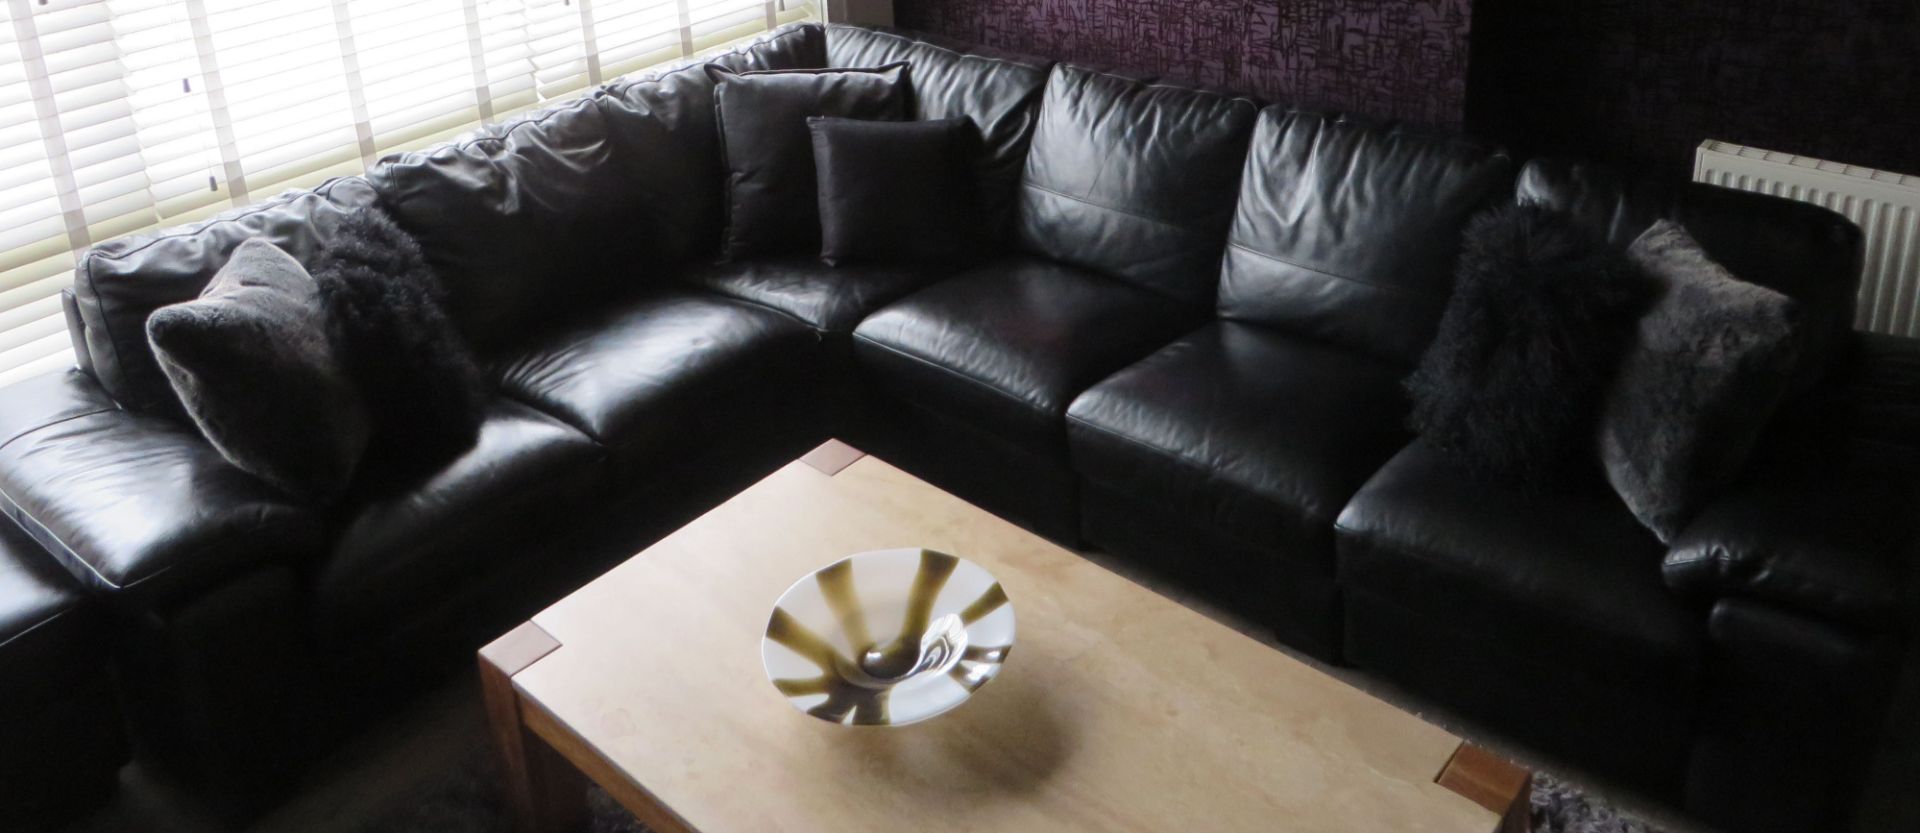 1 x Large Black Leather DFS Corner Sofa with 1 x Pouffe- Excellent Condition - Over £4000 new - Image 16 of 17